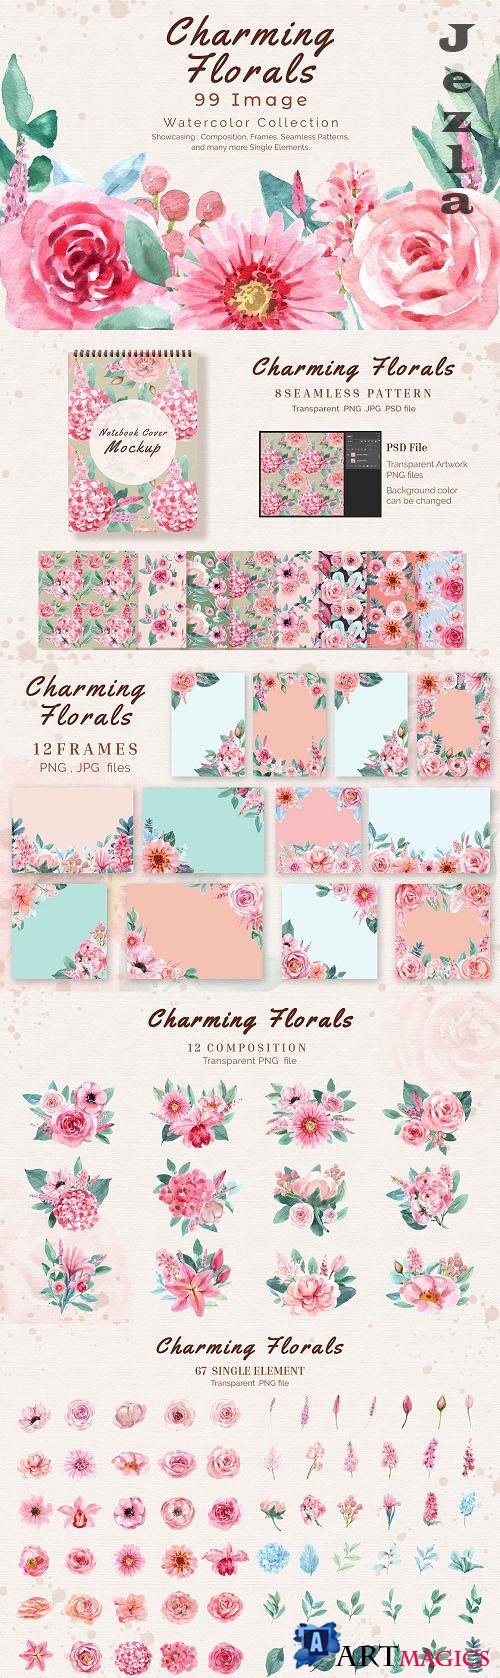 Charming Flowers of wedding watercolor - 6298138